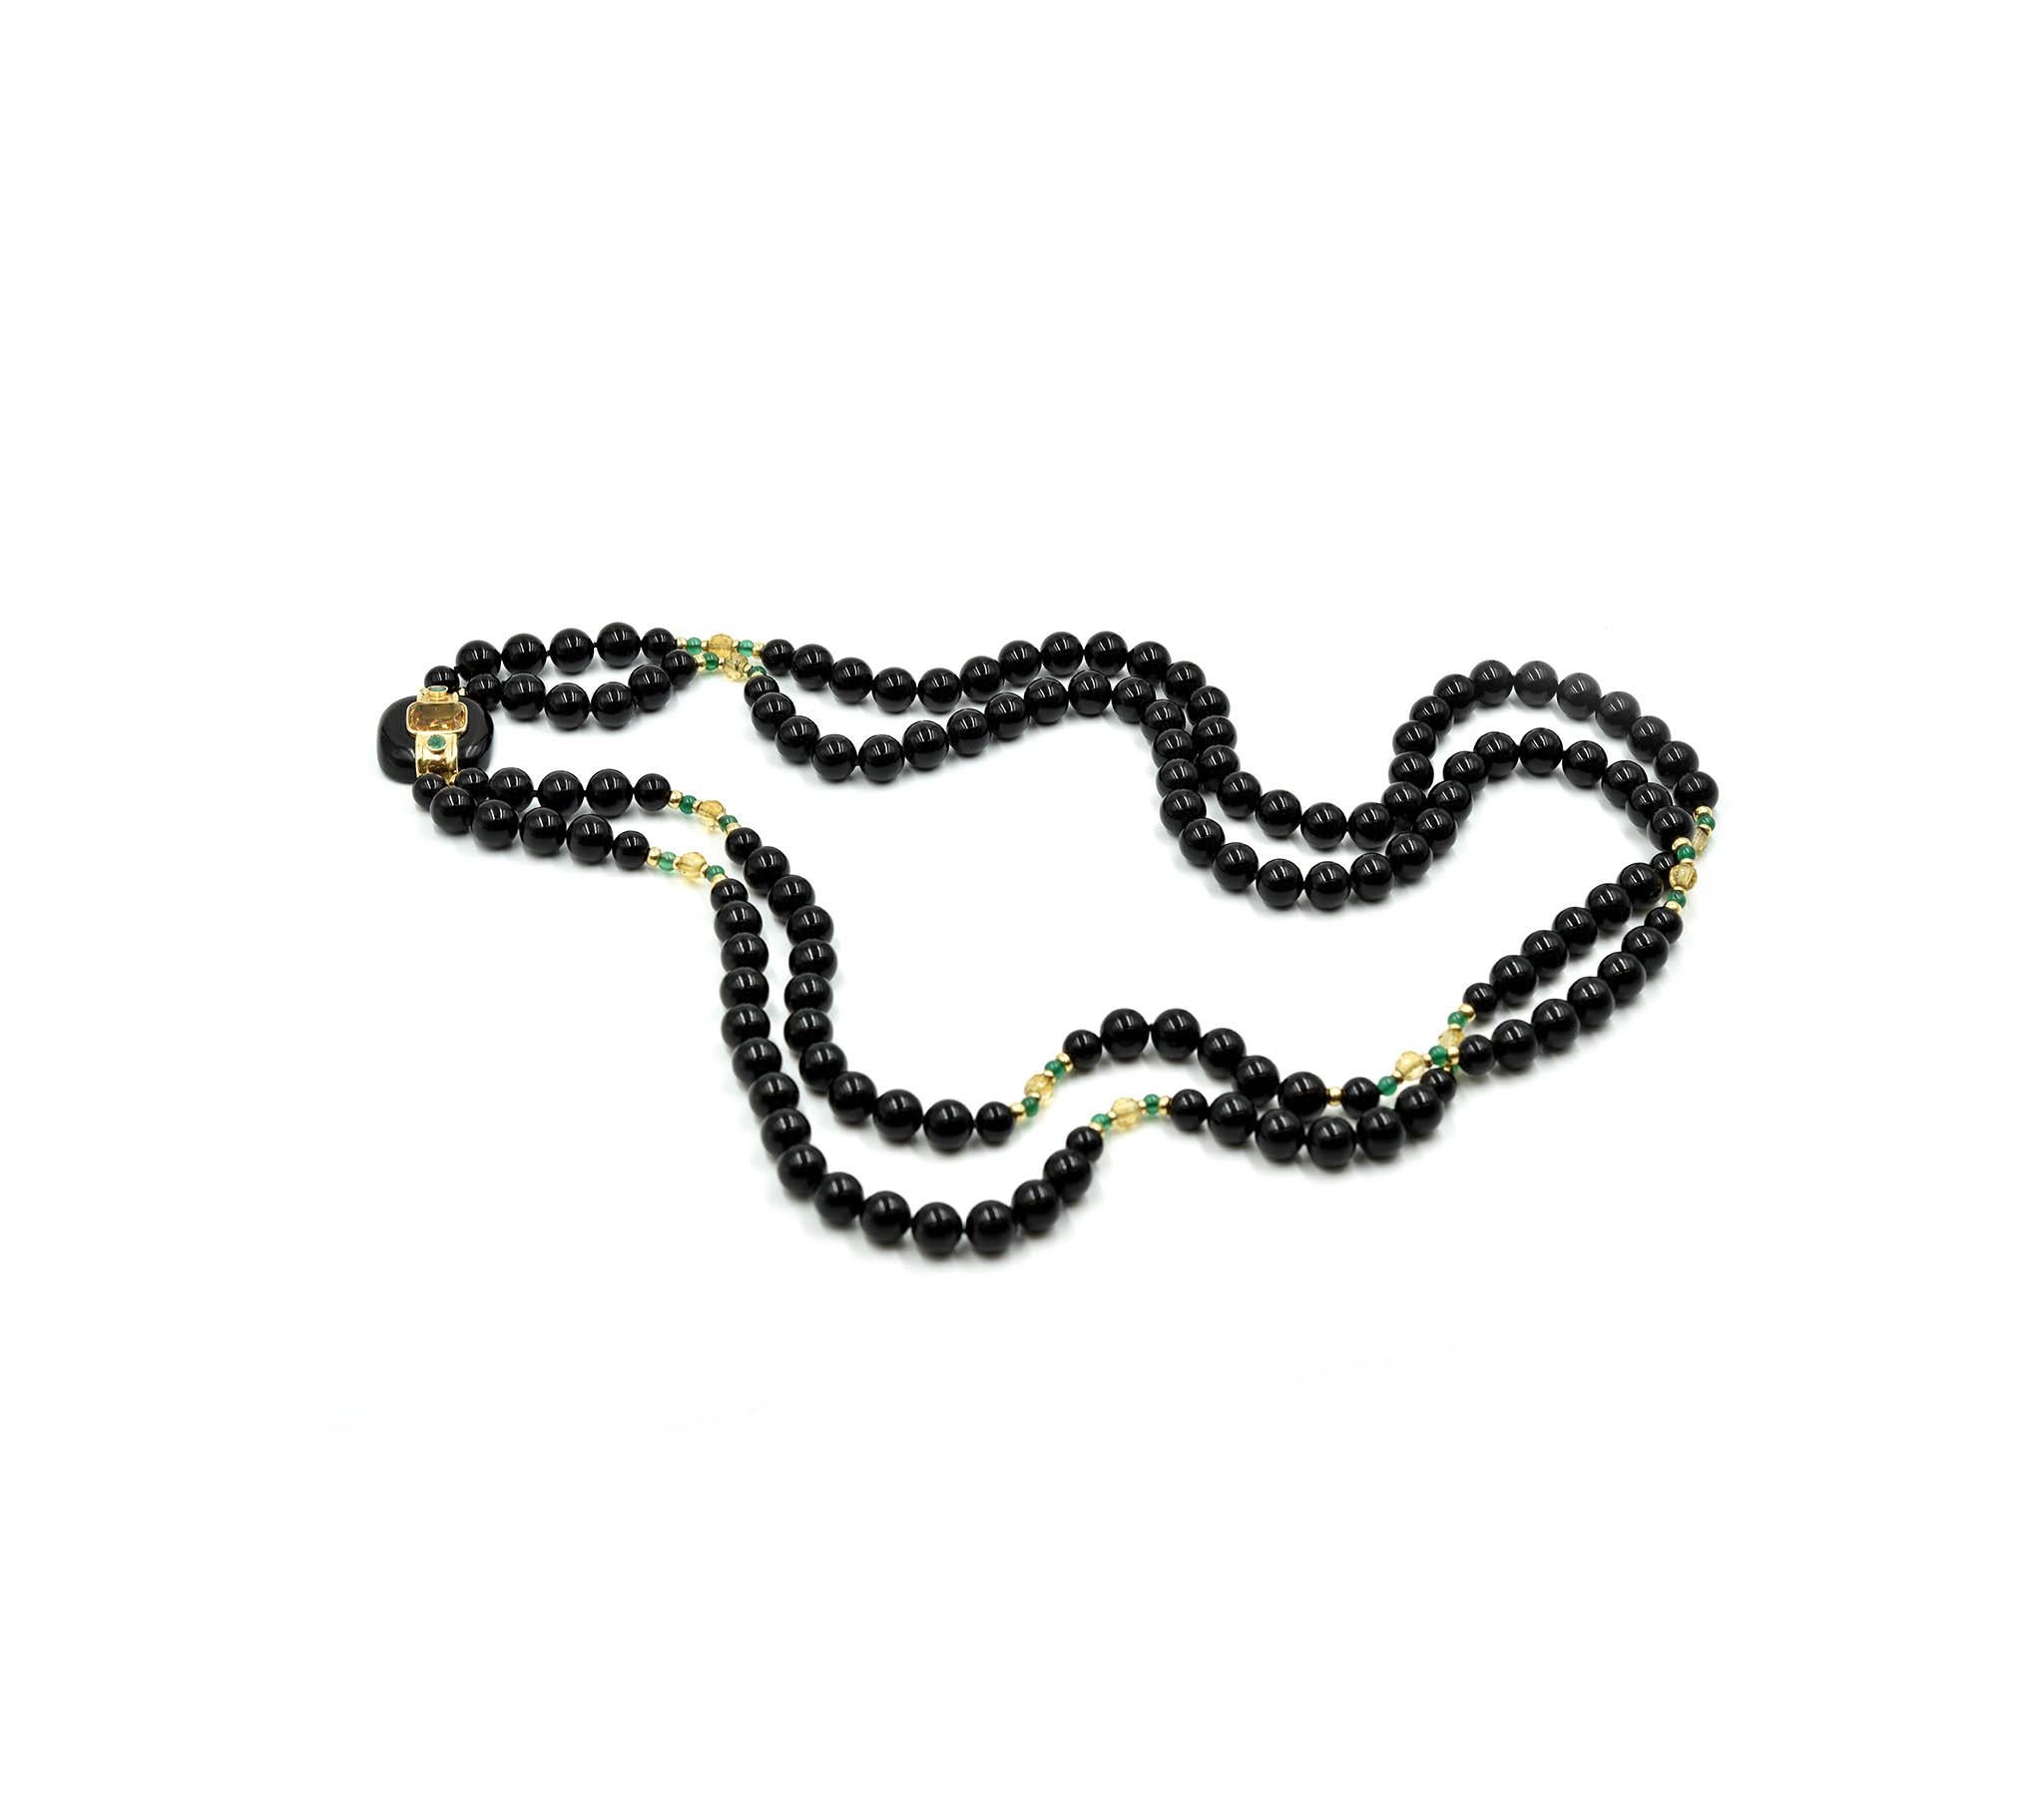 Women's or Men's 14 Karat Yellow Gold Beaded Black Onyx Necklace with Citrine and Emerald Pendant